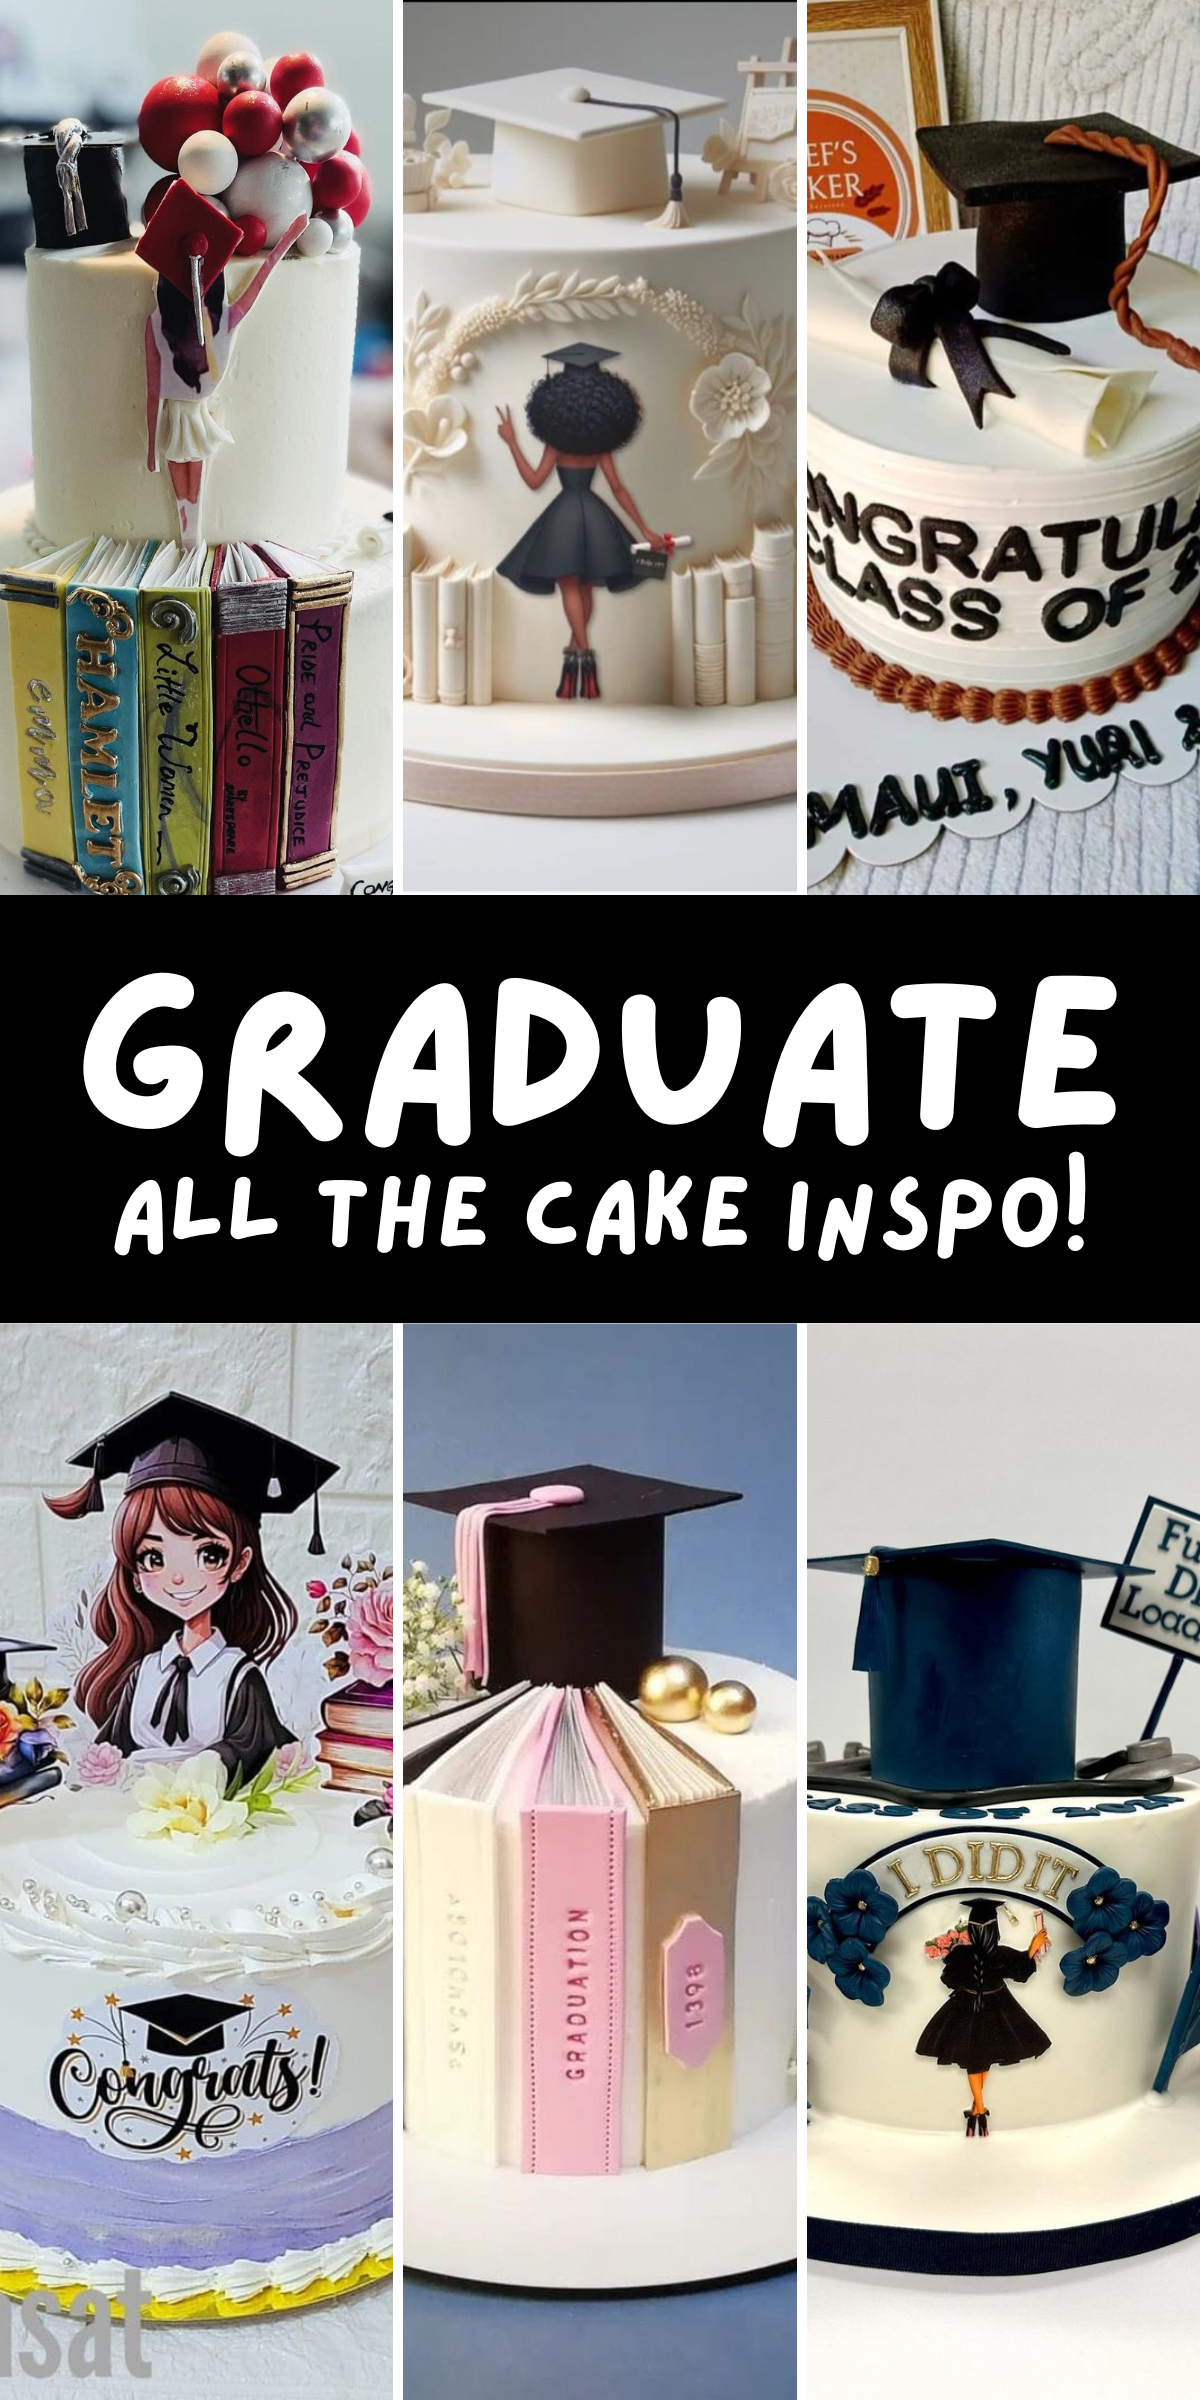 🎓 Honor your graduate’s achievement with a graduation cake that reflects your pride and joy.